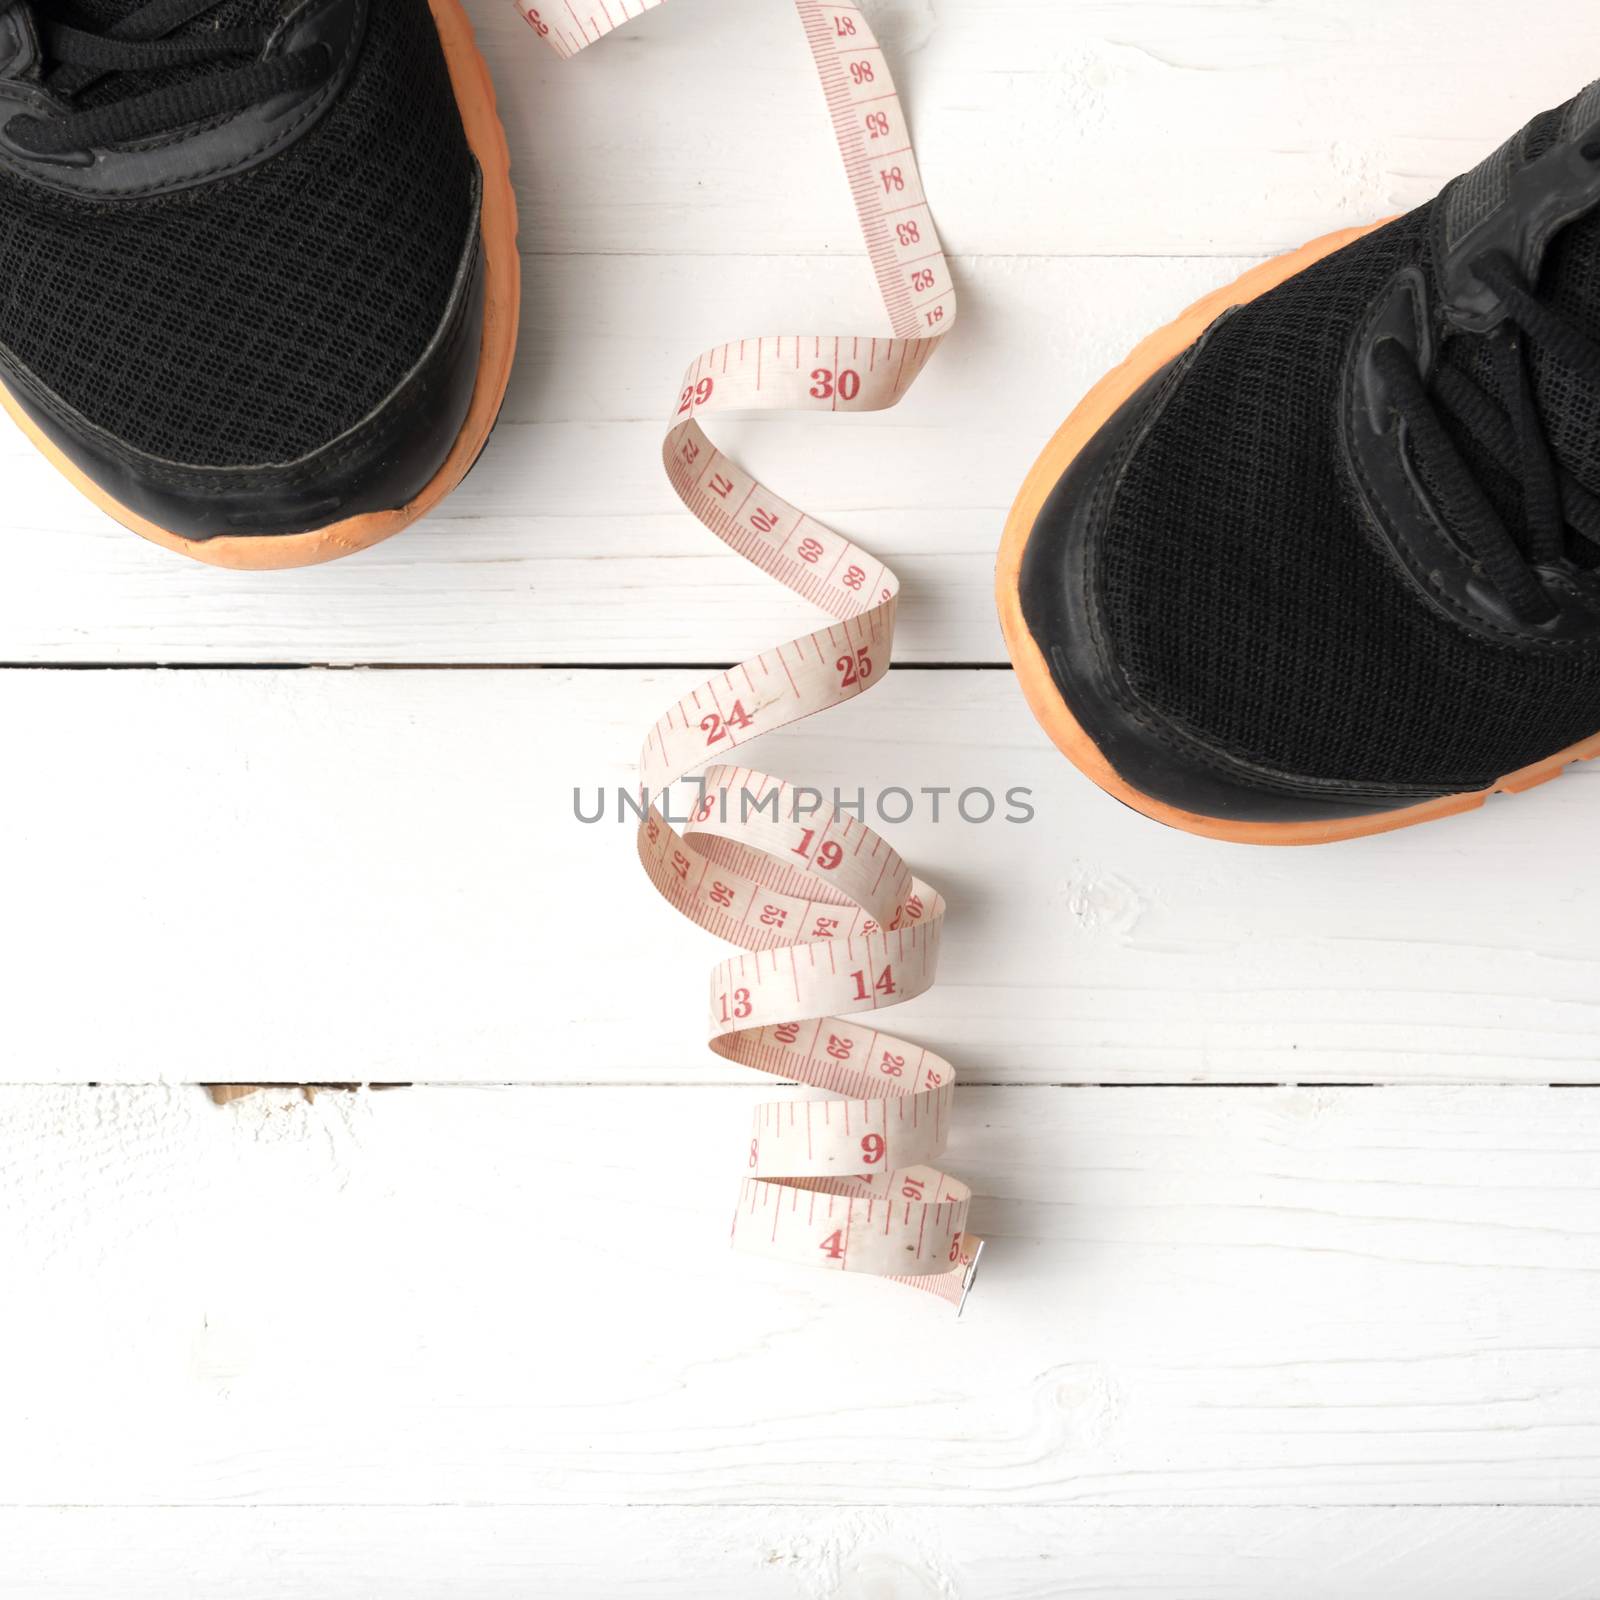 running shoes and measuring tape by ammza12